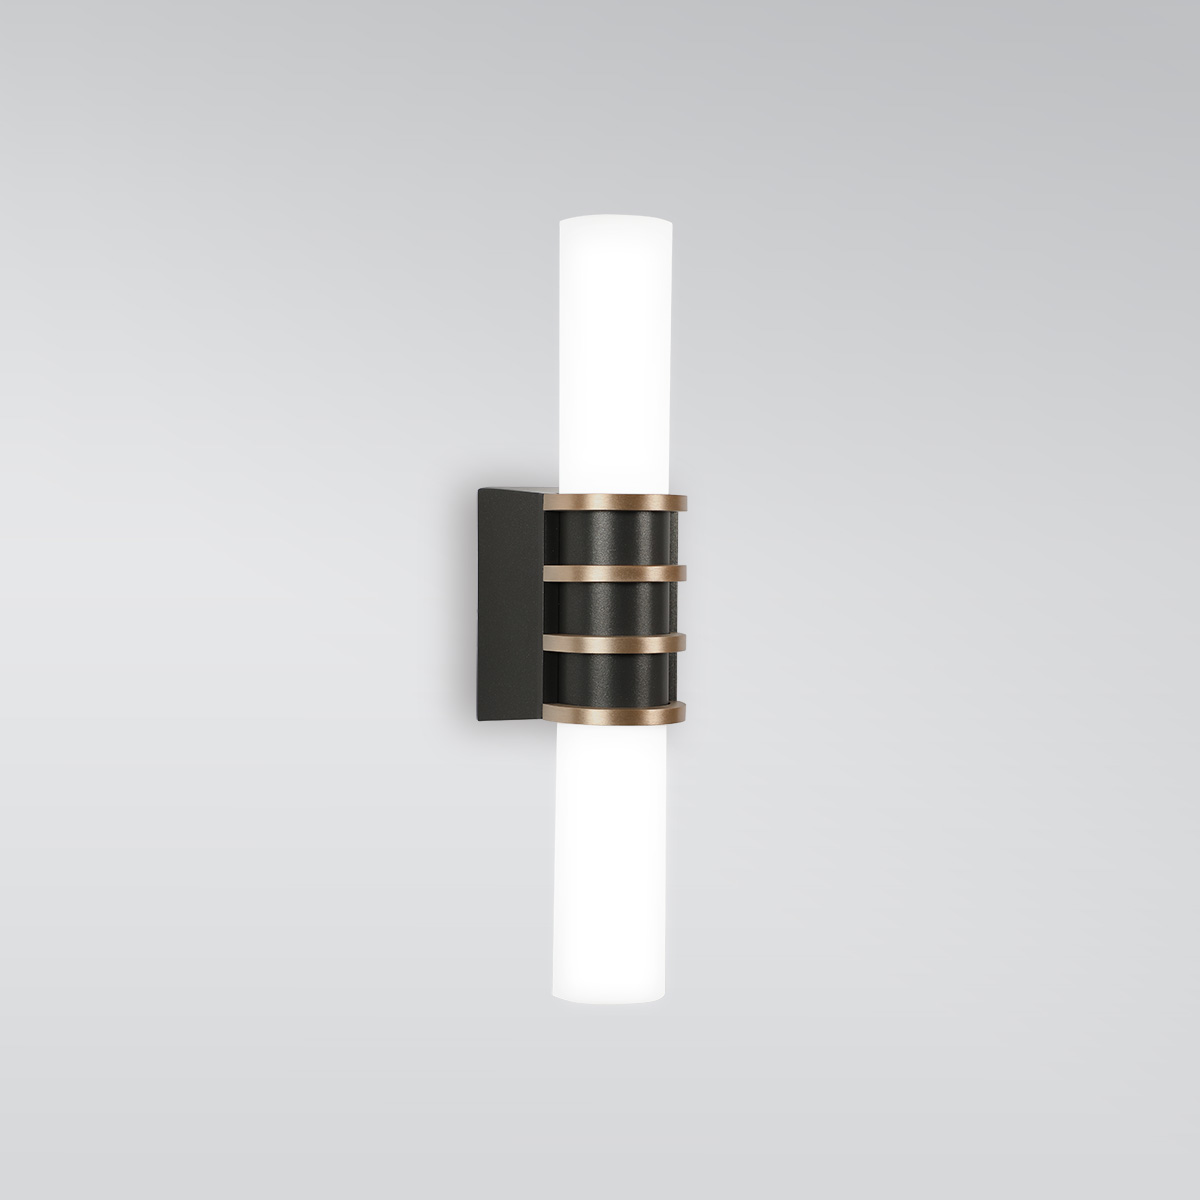 A small cylindrical indoor sconce with a center trim